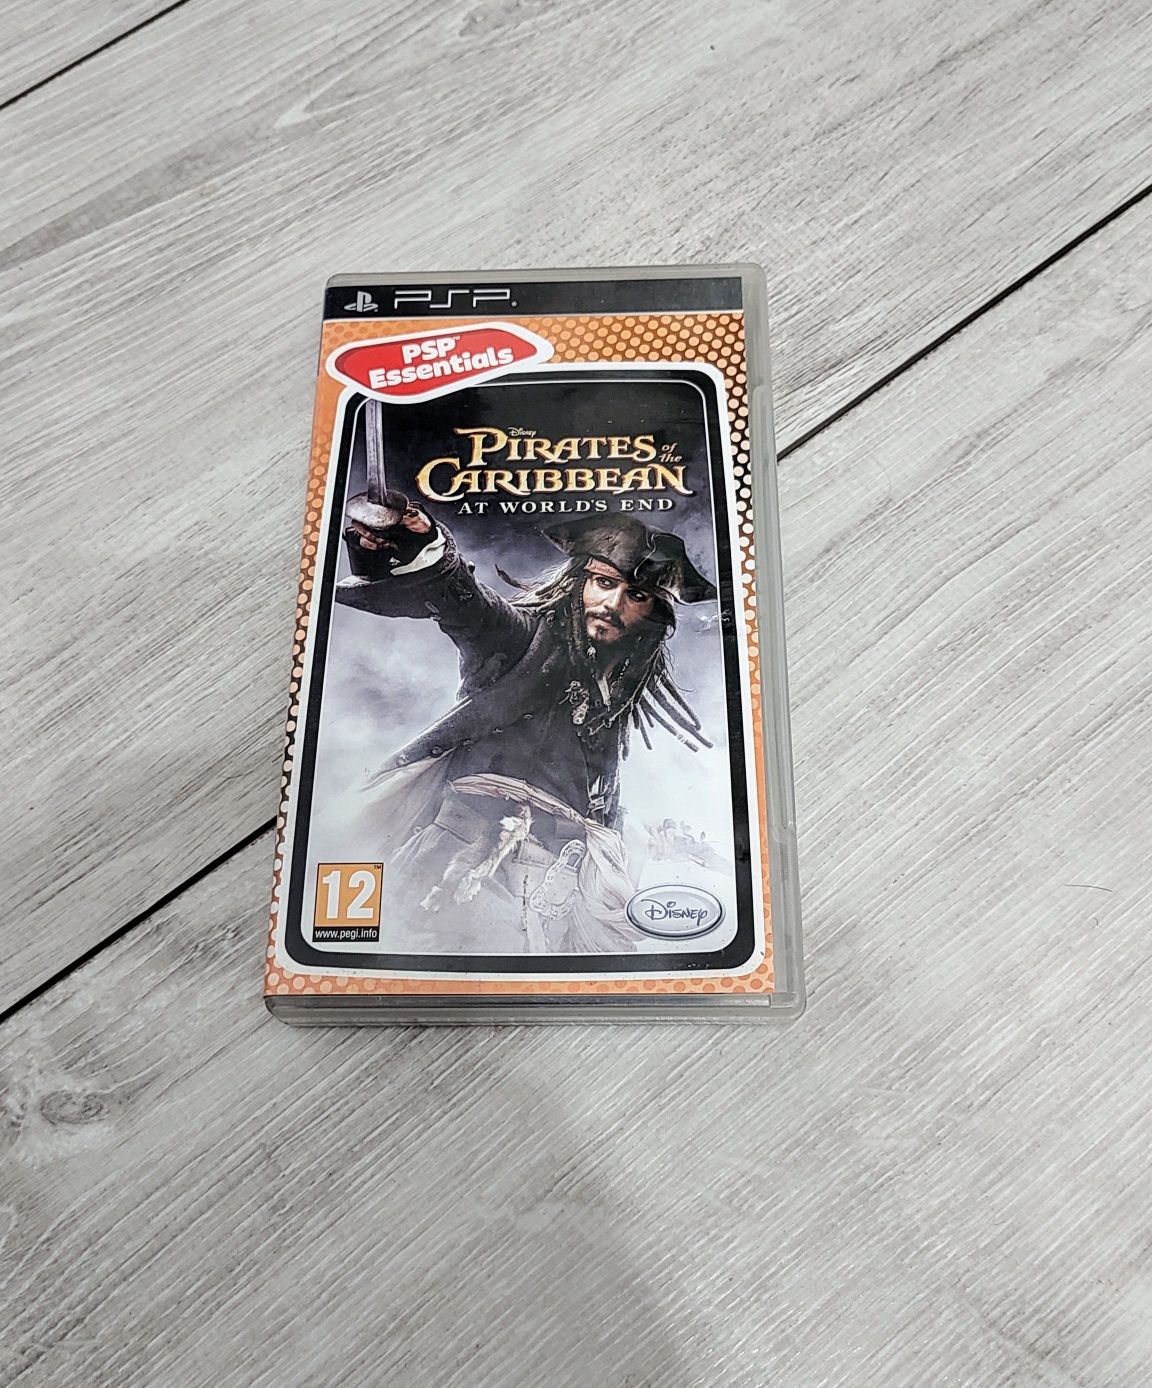 Pirates of the Caribbean at world's end PSP